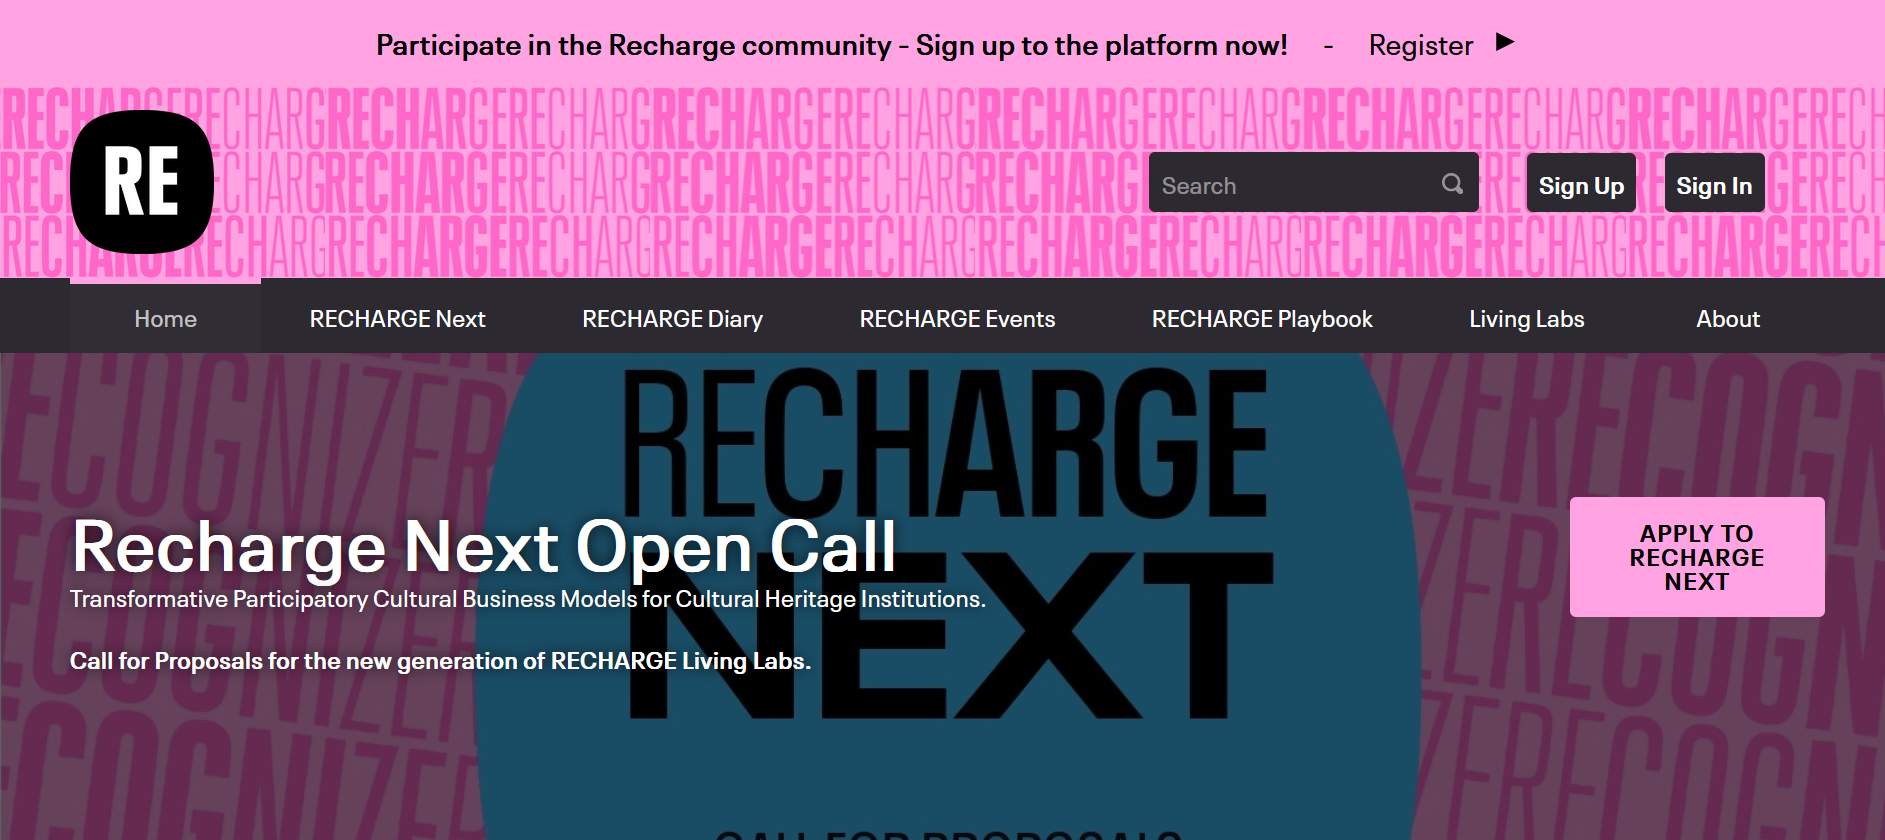 RECHARGE NEXT – Call for Proposals for new Living Labs